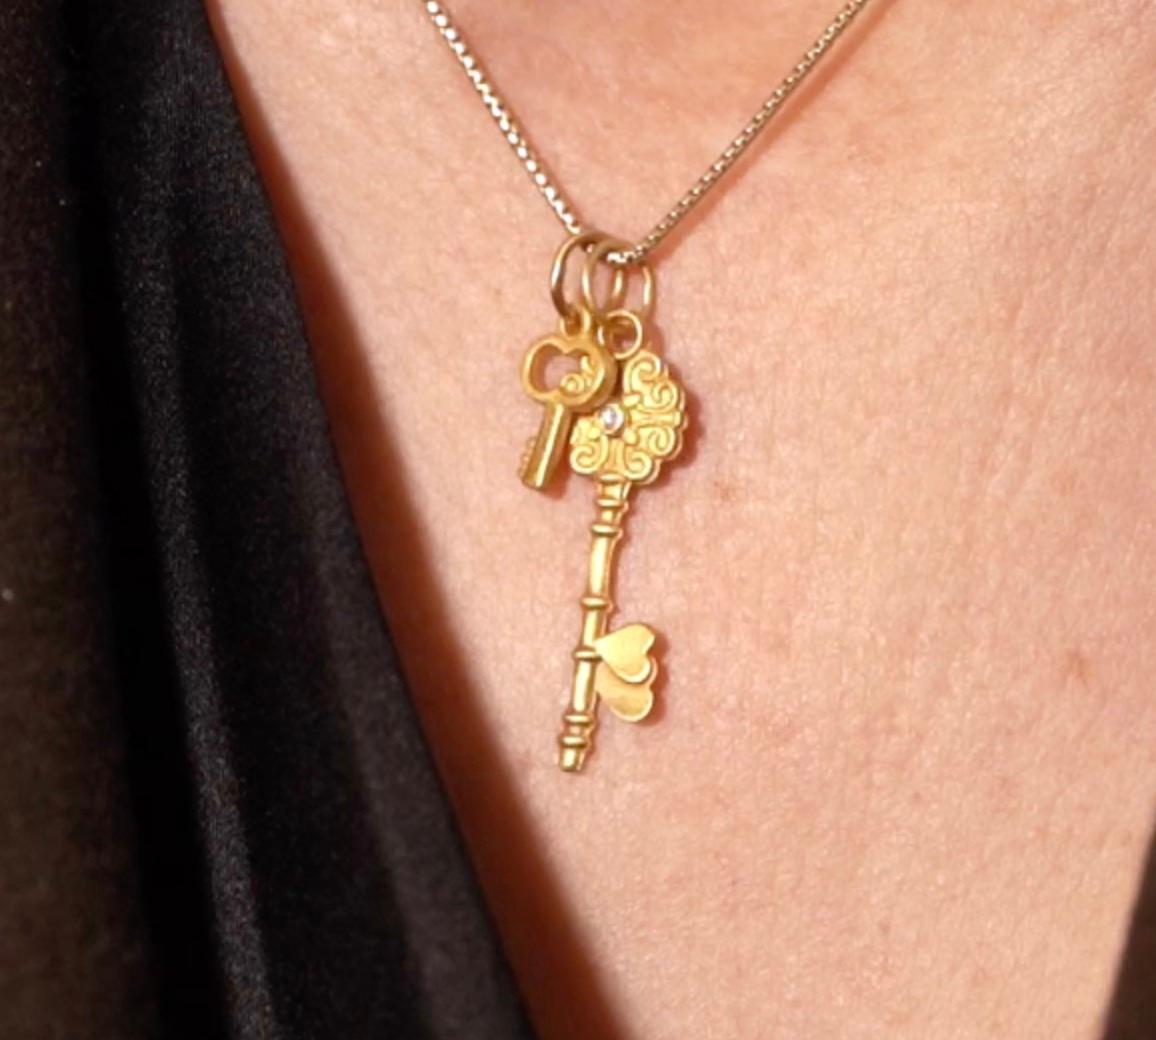 Miniature Key Charm Pendant Necklace, 24kt Solid Gold by Prehistoric Works of Istanbul, Turkey. This key charm pairs well alone or with other coin amulet or charms.  Measures 8mm x 13mm. Comes with a 16